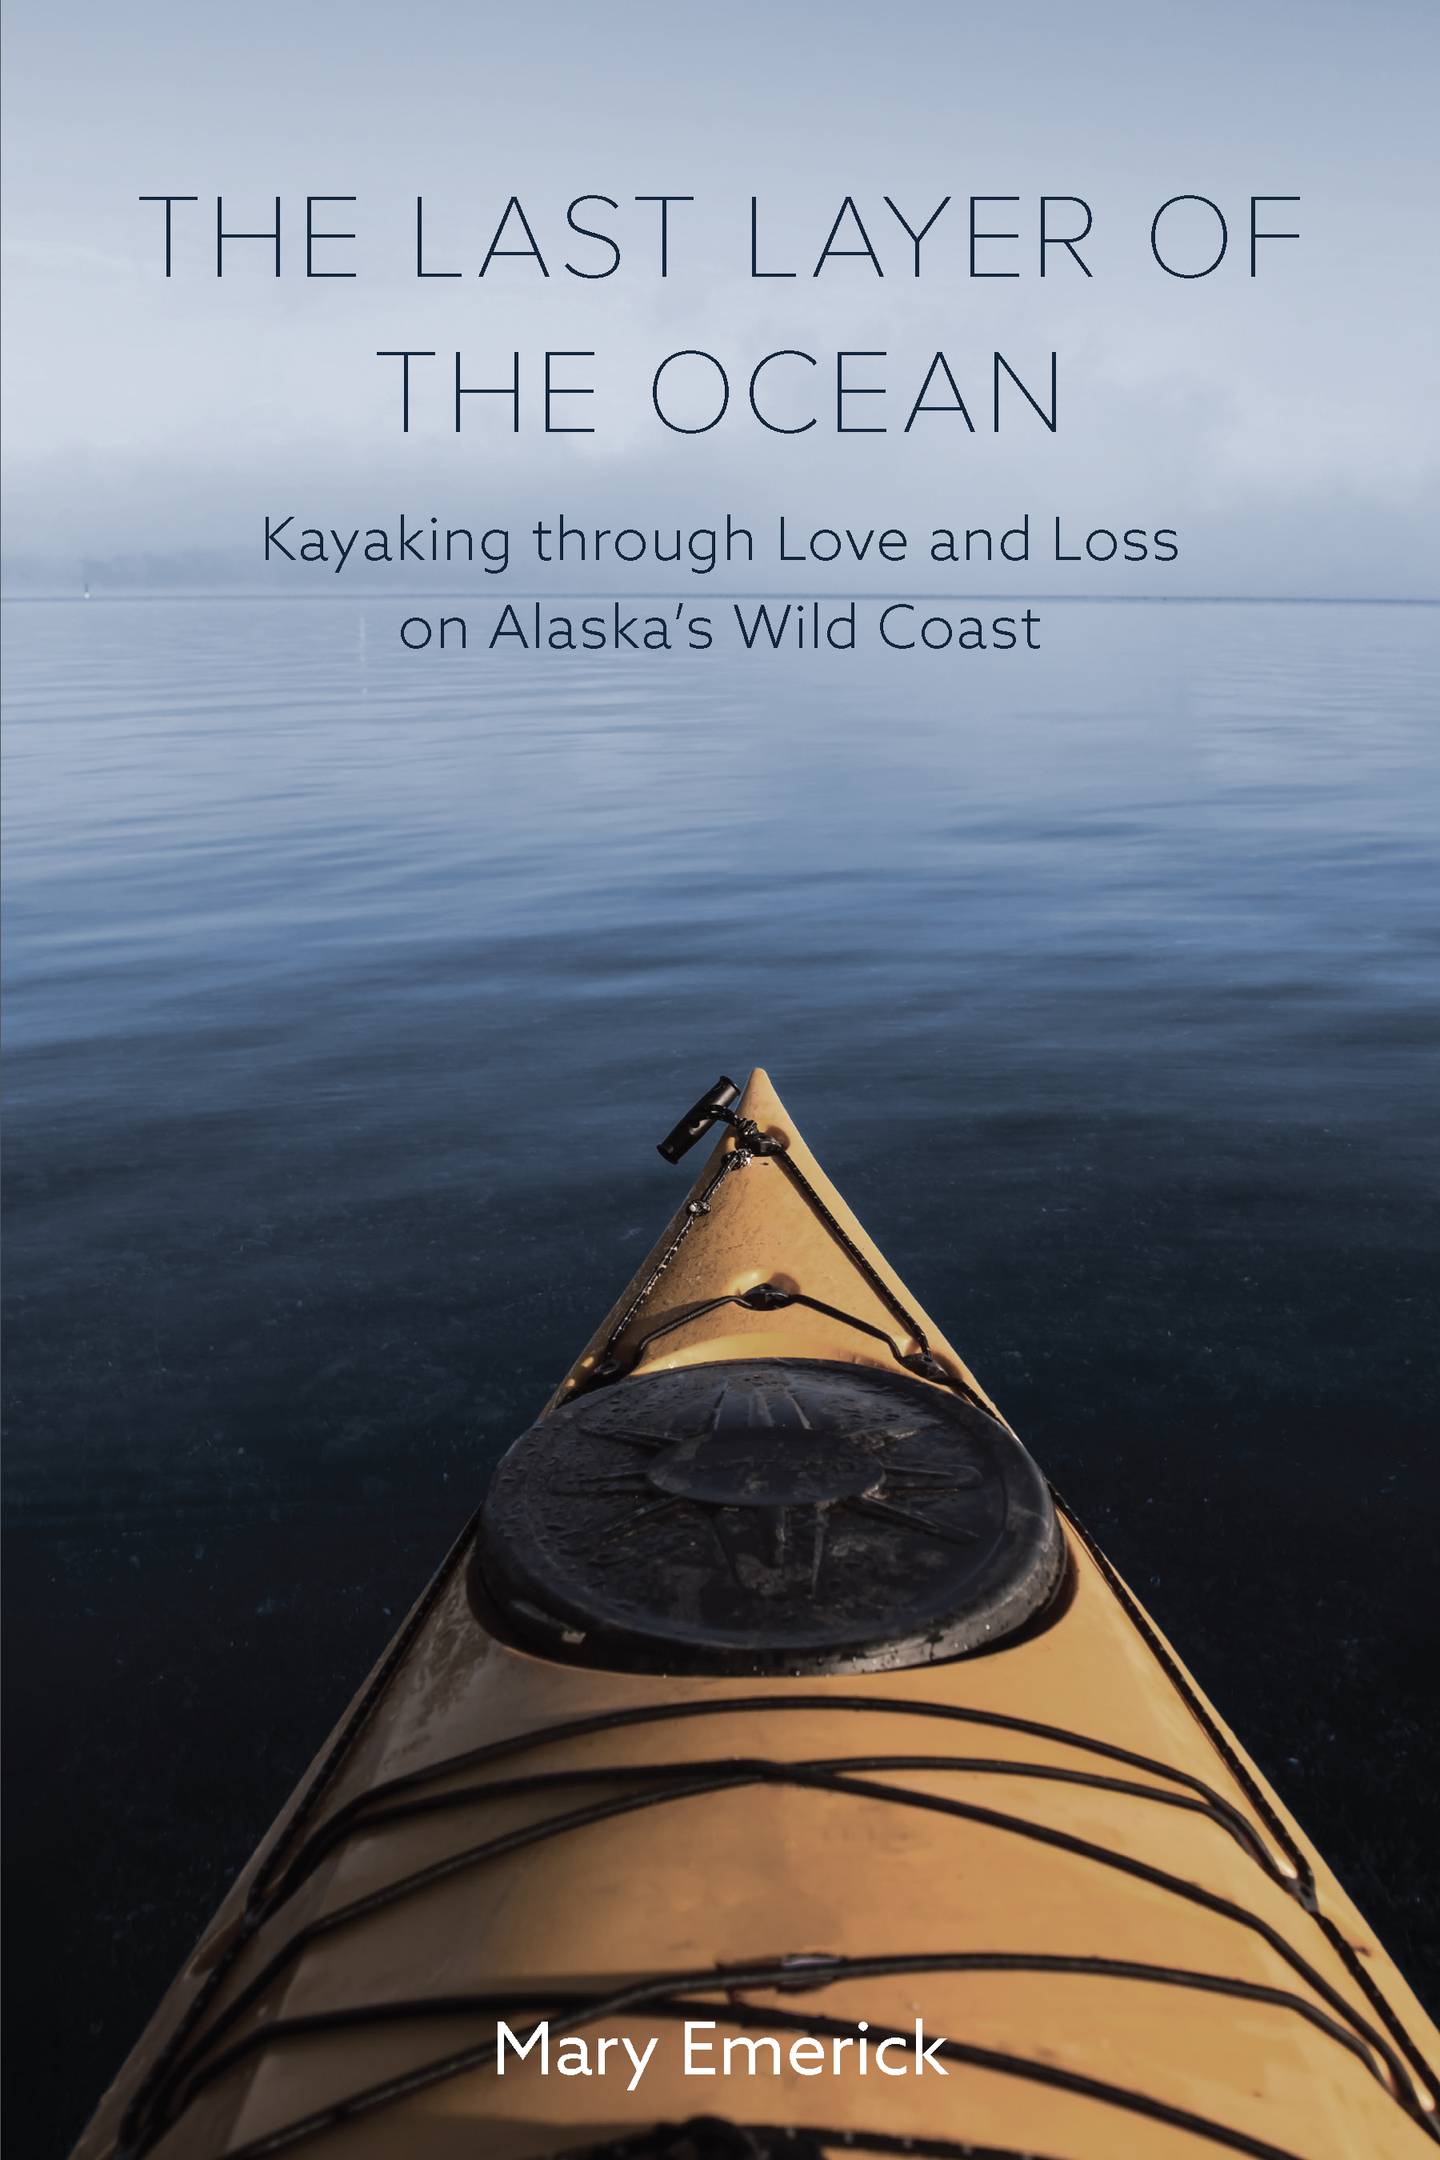 “The Last Layer of the Ocean: Kayaking through Love and Loss on Alaska's Wild Coast,” by Mary Emerick